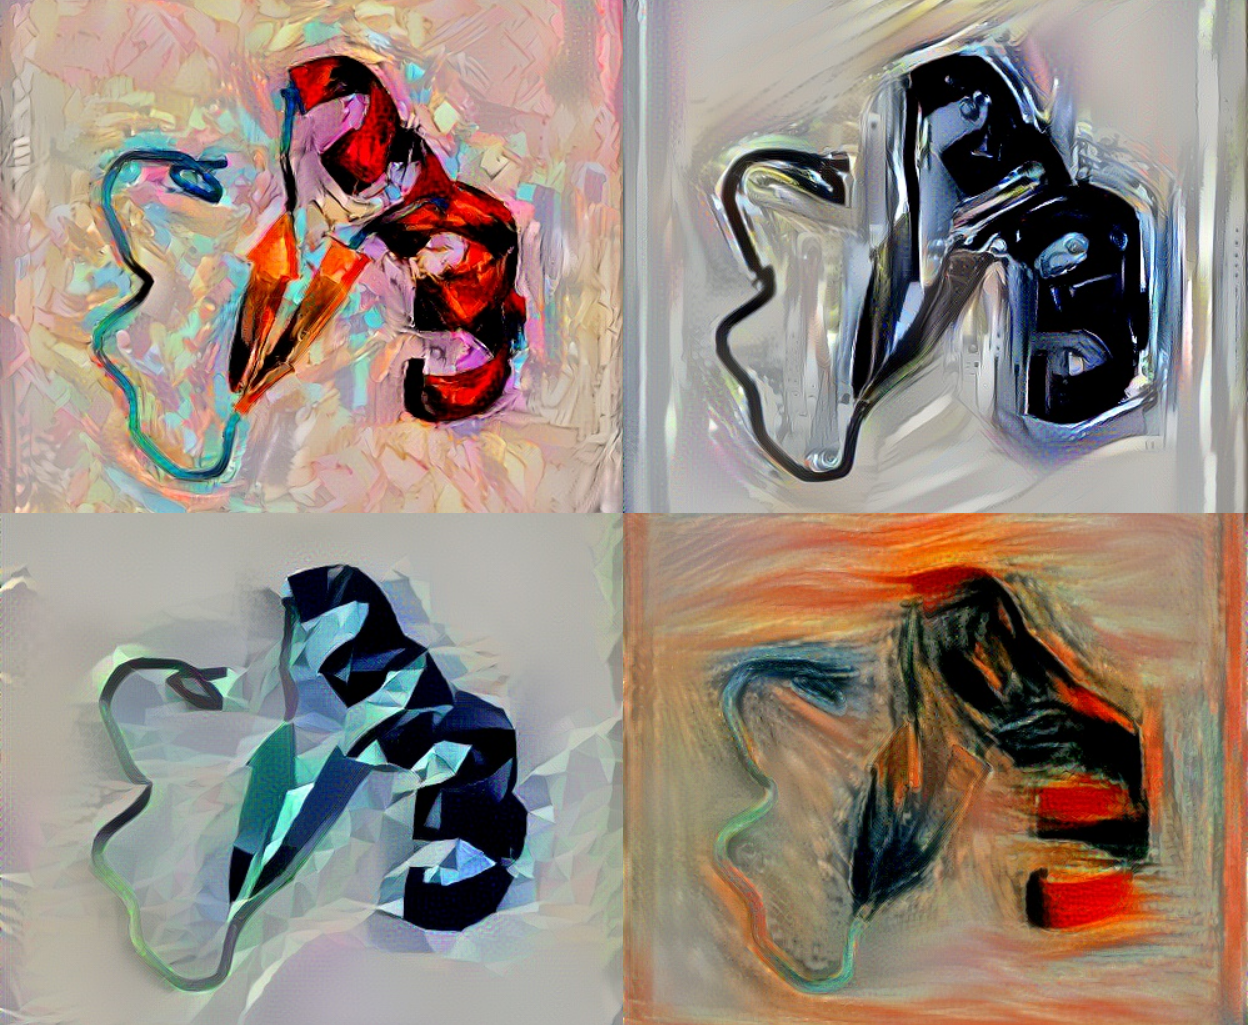 Generated images of four proteins in different painting styles